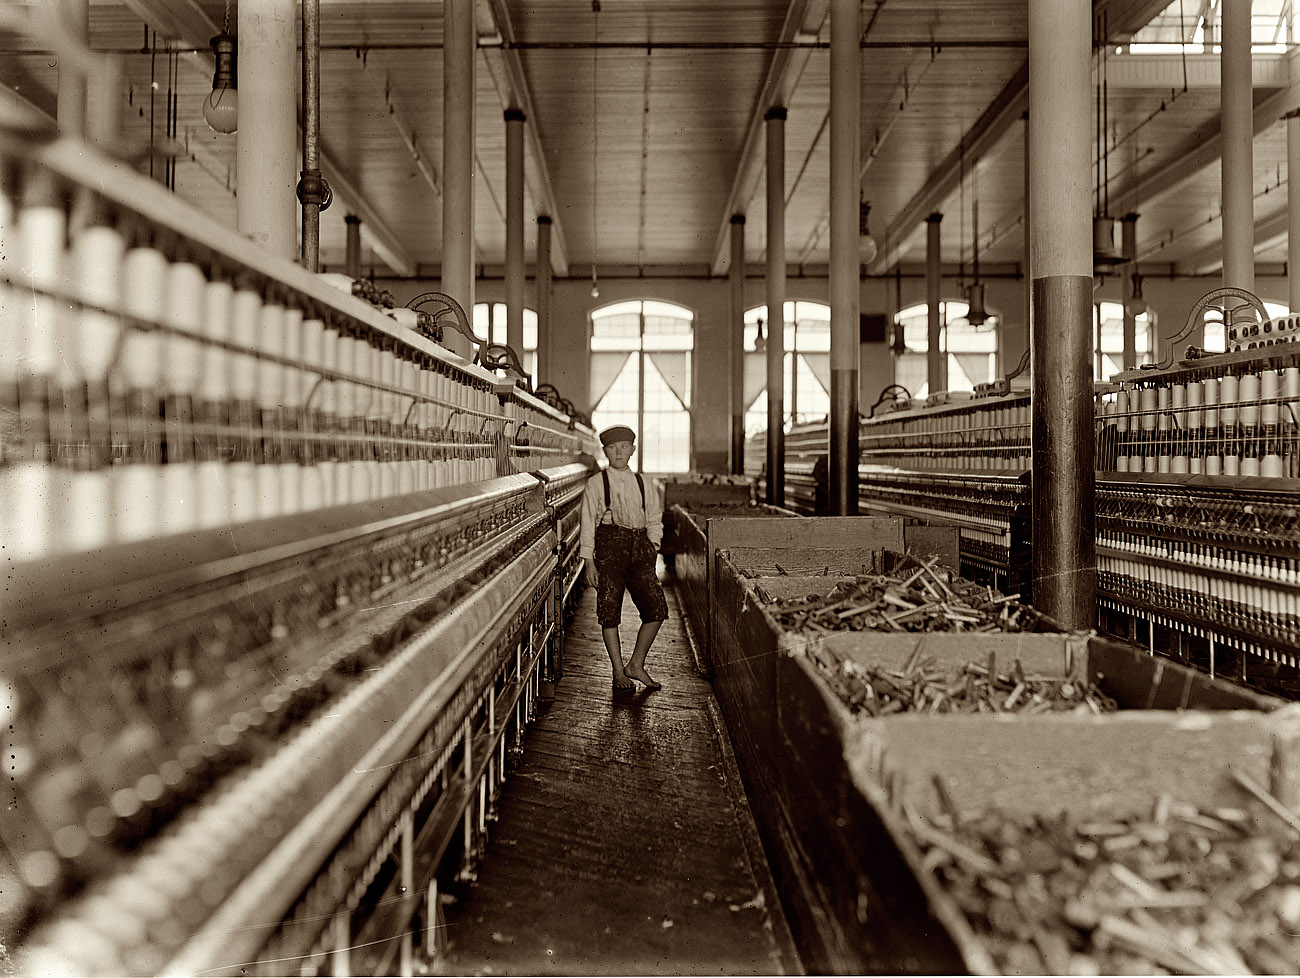 December 1908. Lancaster, South Carolina. "One of the youngsters working in Lancaster Cotton Mills." View full size. Photograph by Lewis Wickes Hine.